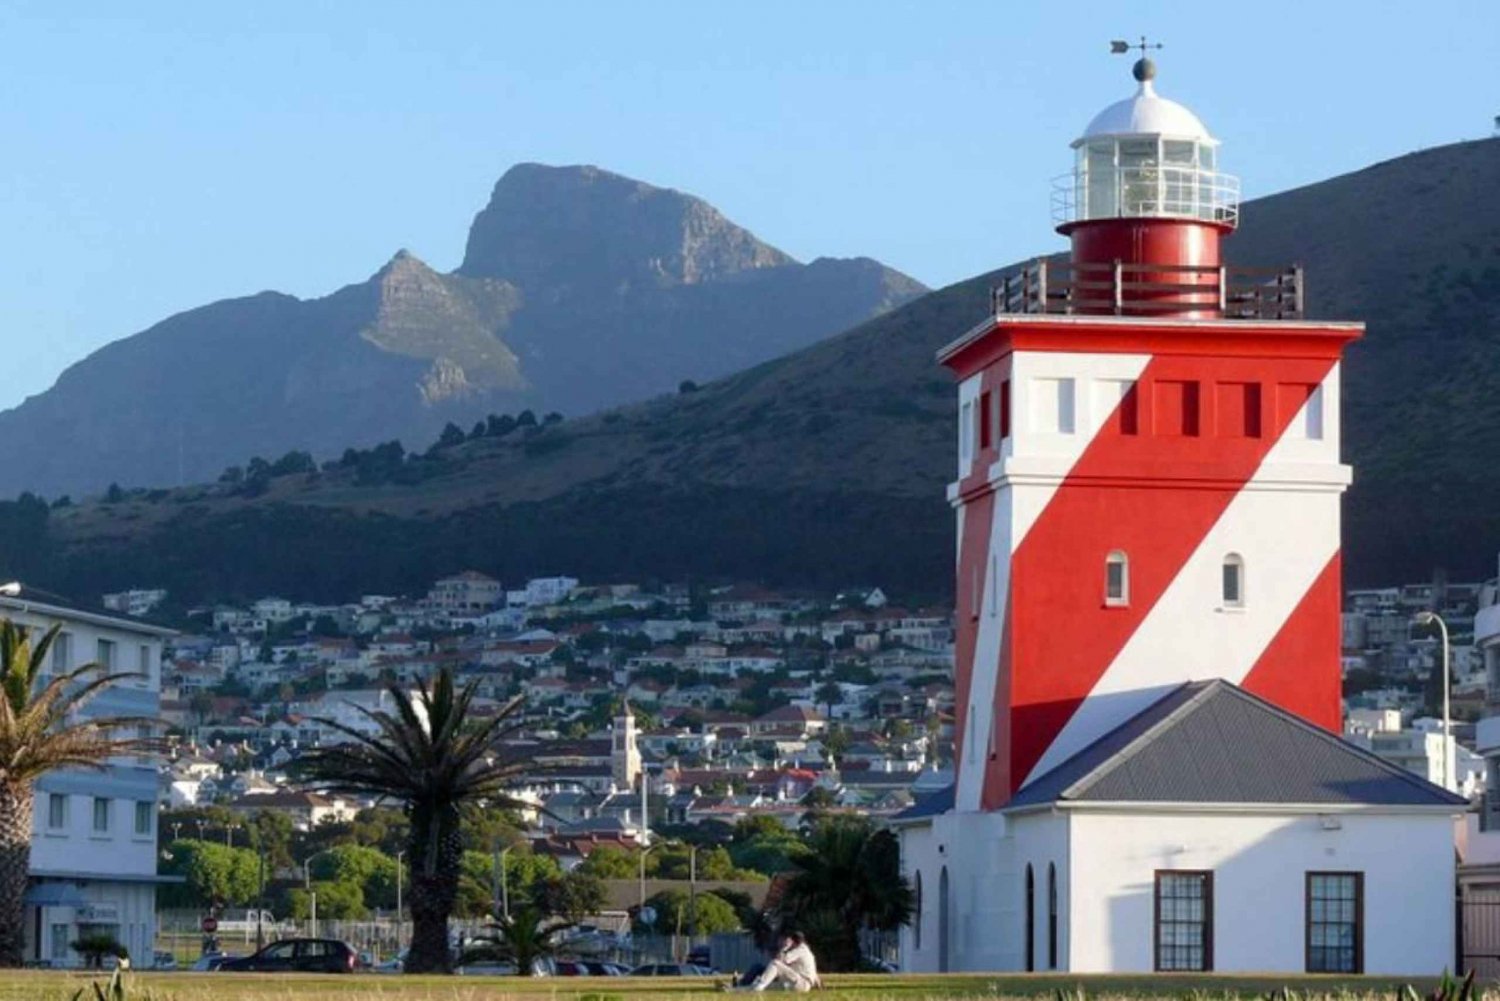 Meandering through Mouille Point: A Self-Guided Audio Tour